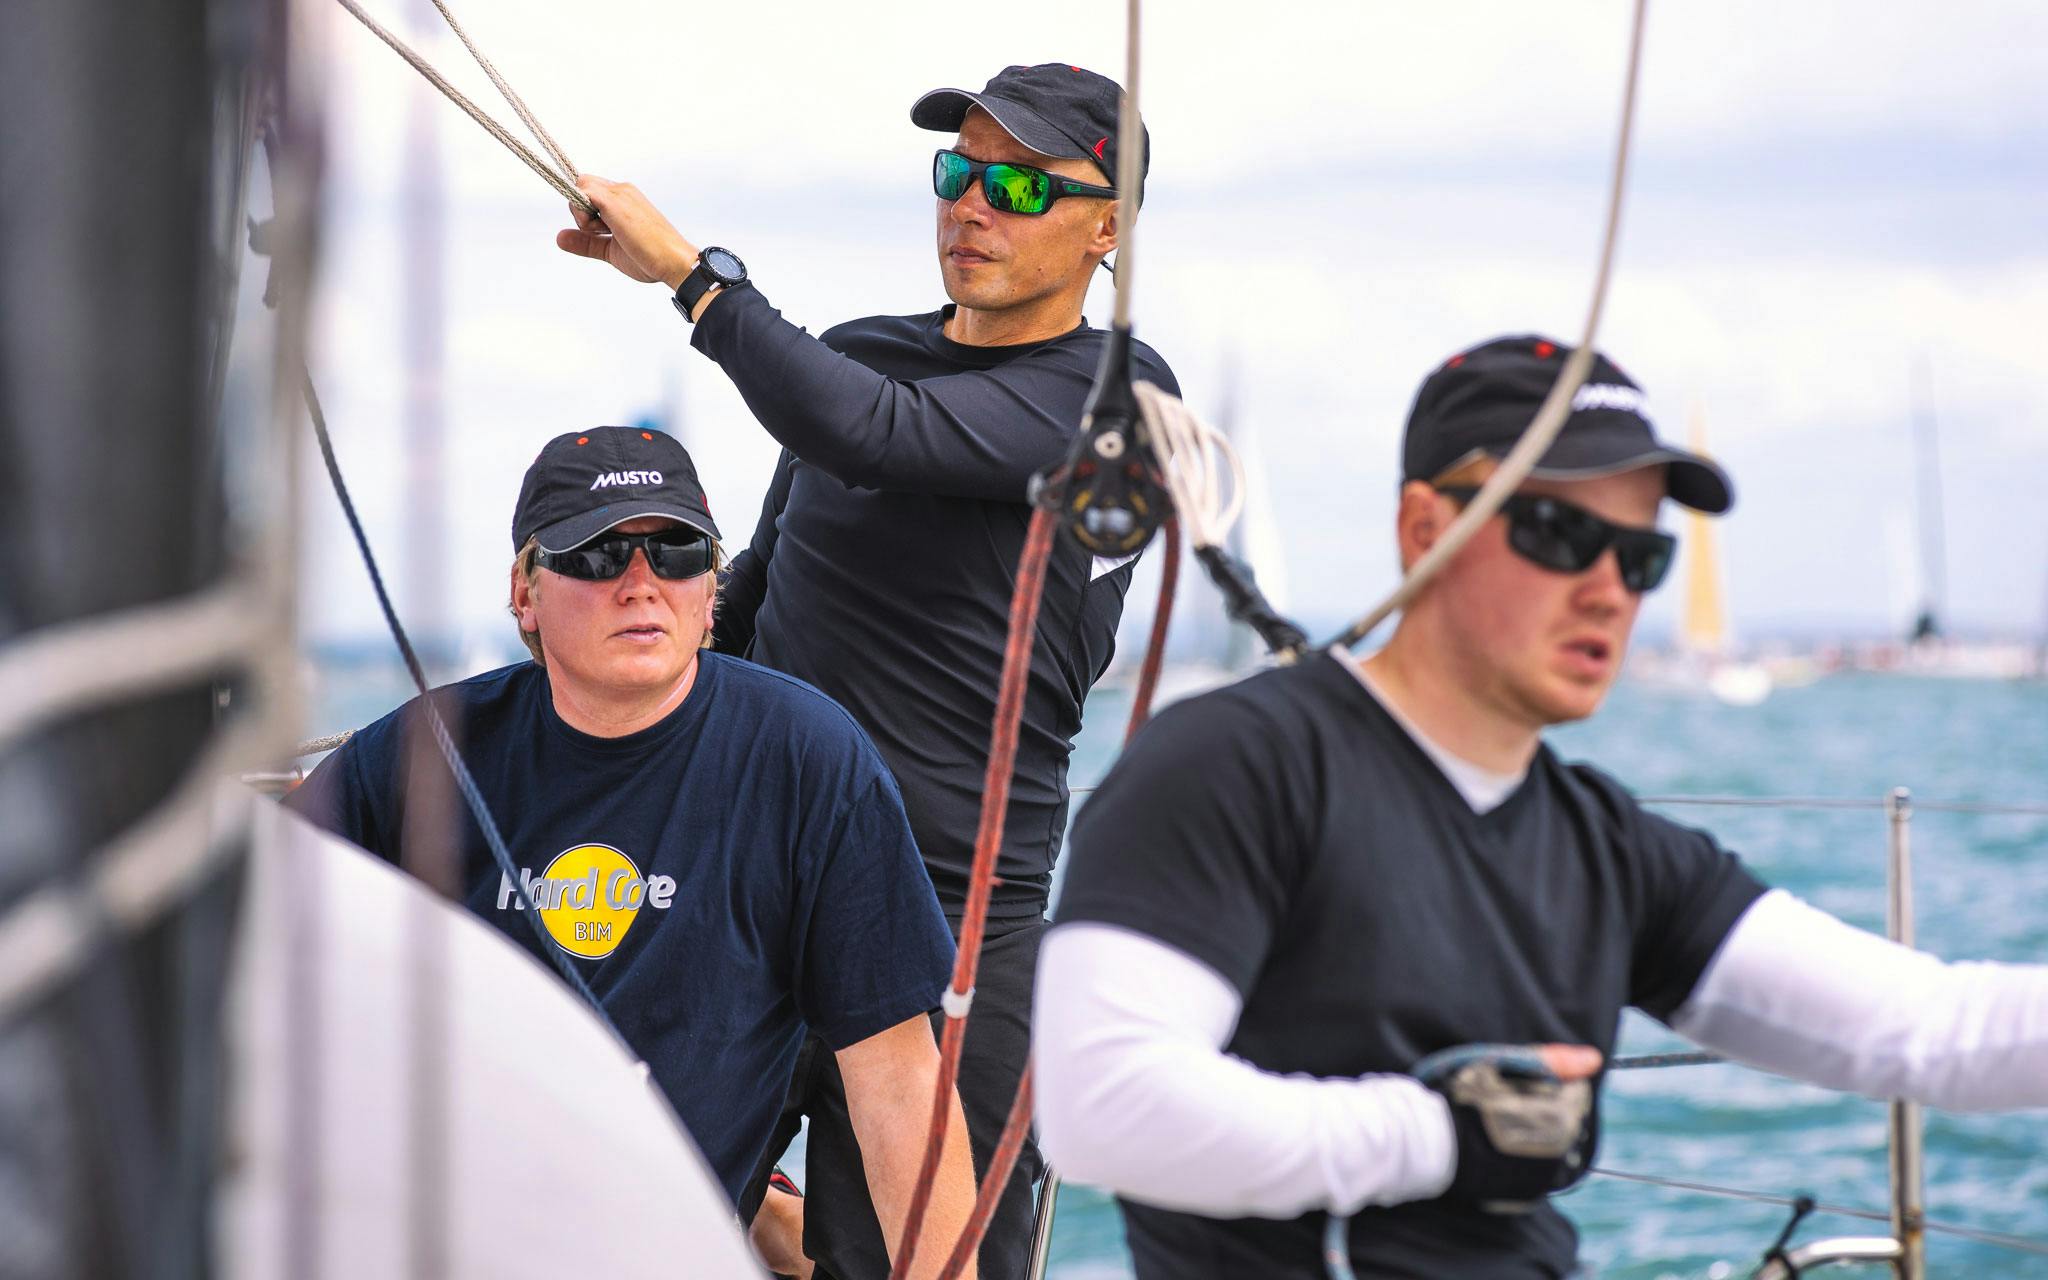 Perttu has transformed his hobby of sailing into a skill that has allowed him to compete in some of the world’s most esteemed yacht races.